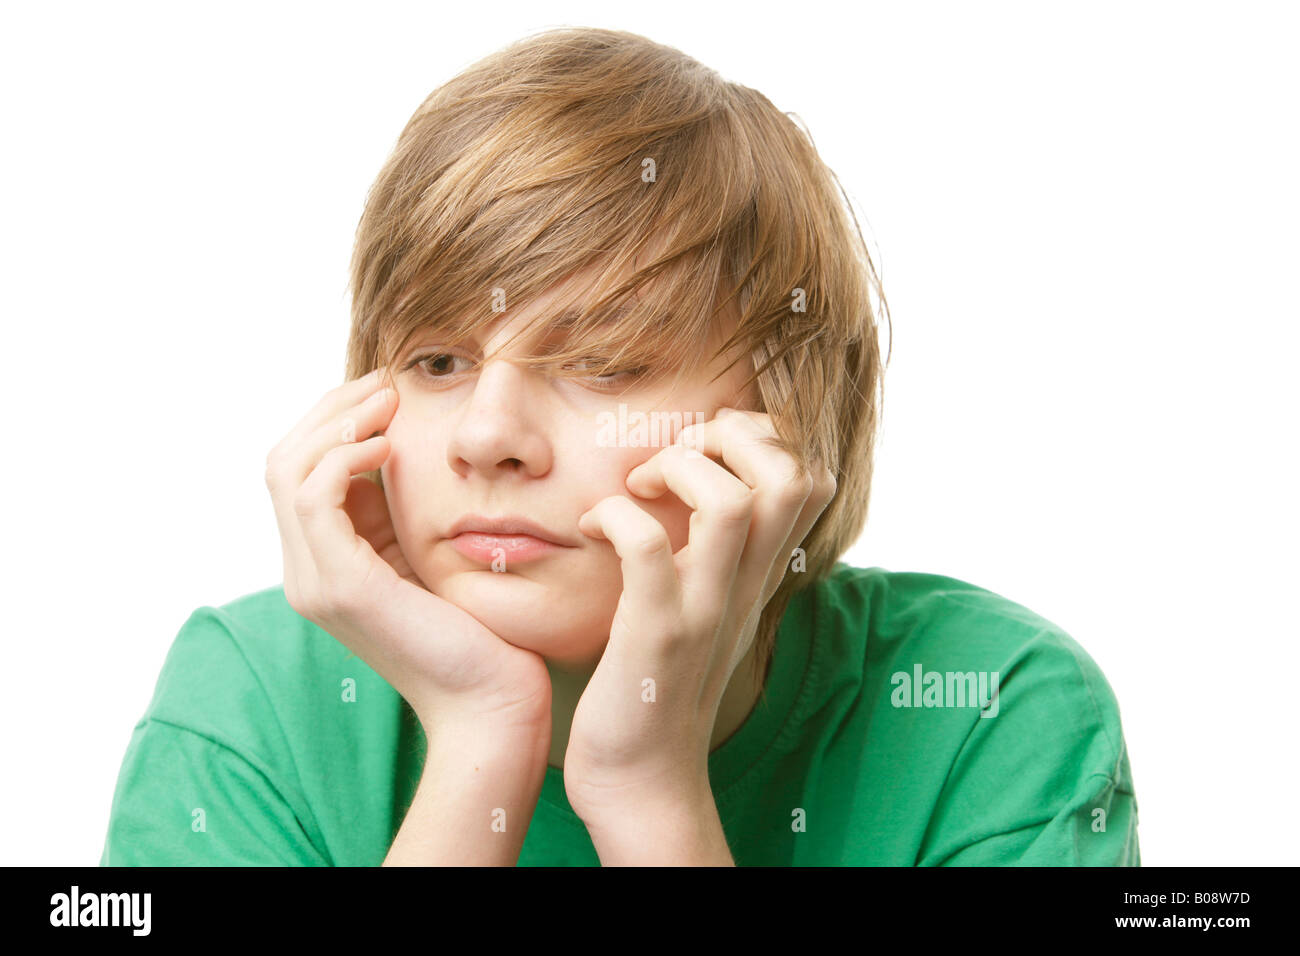 13-year-old boy wearing a green t-shirt resting his chin on his hands Stock Photo